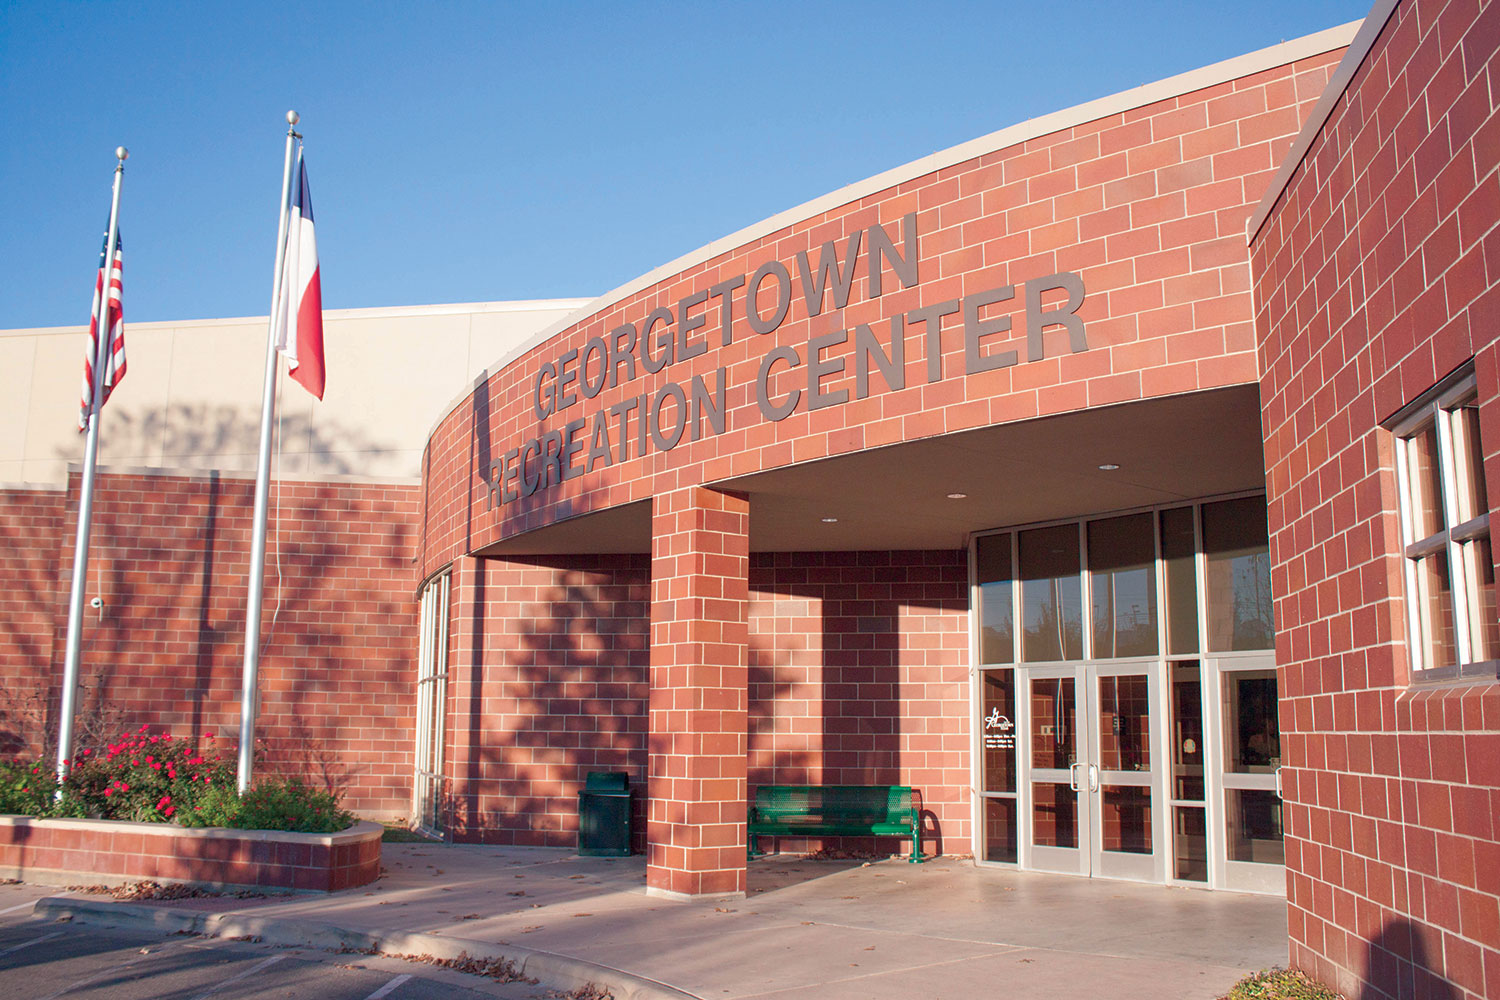 Front entrance to the Georgetown Recreation Center